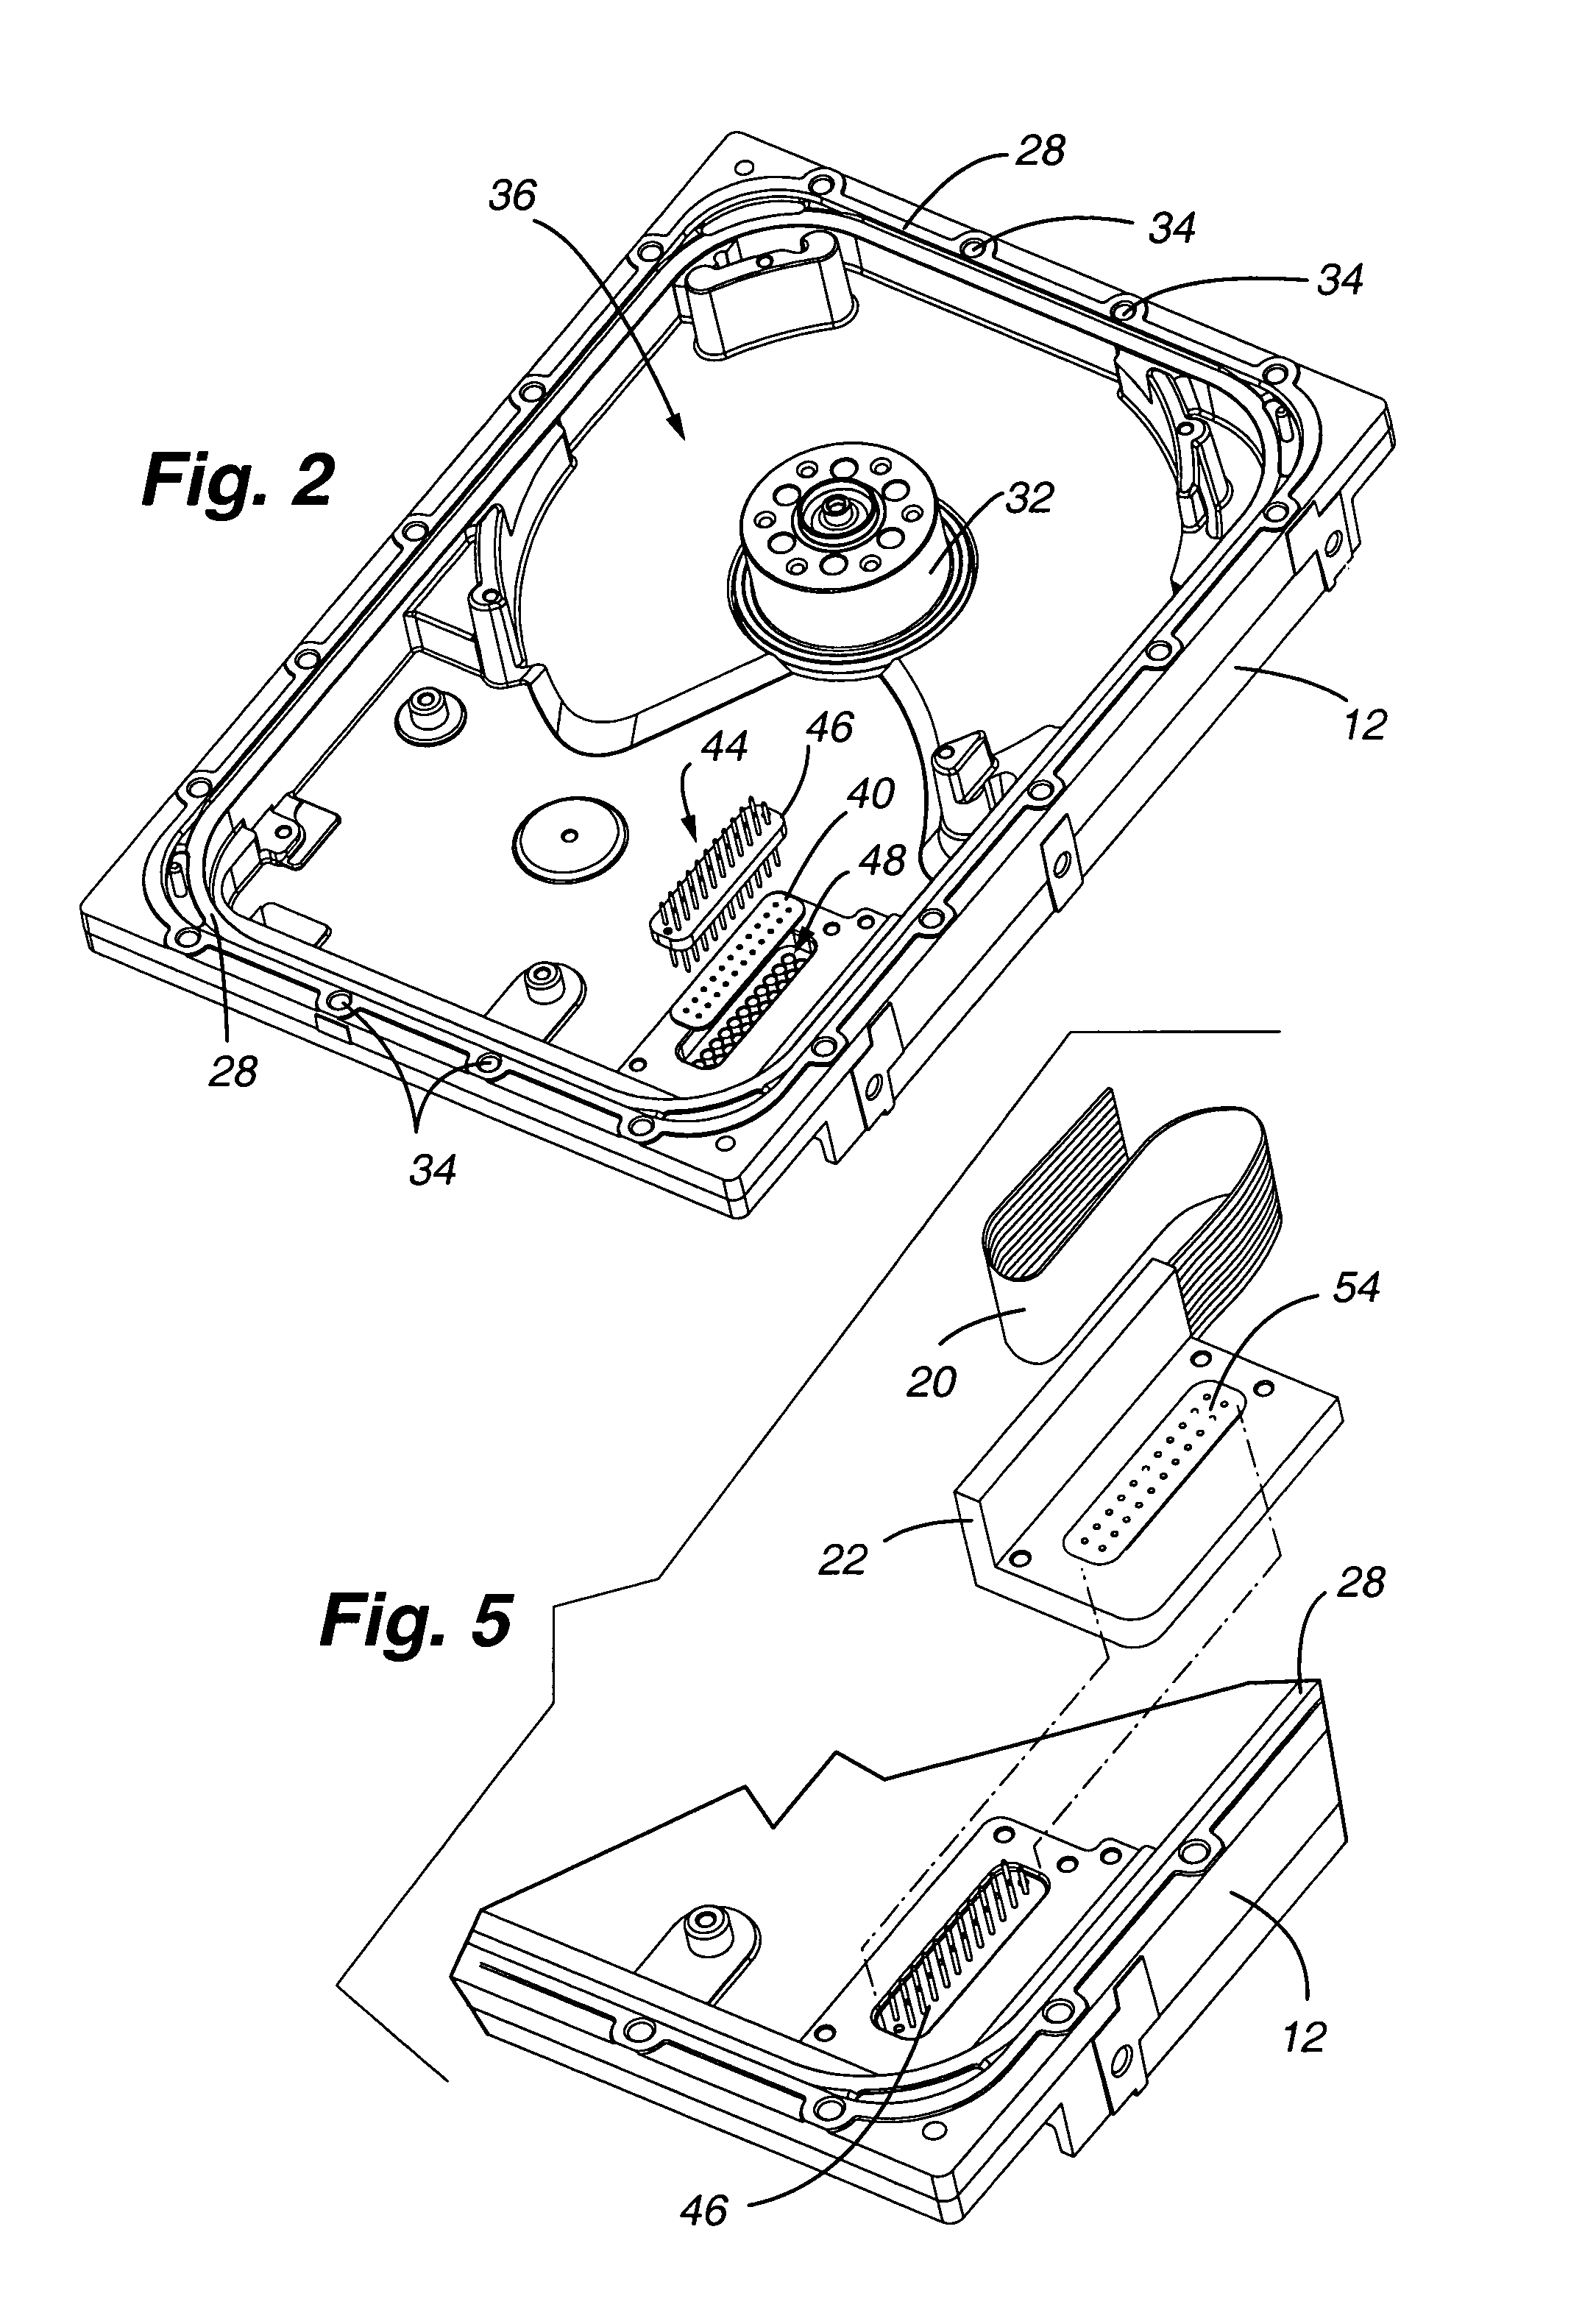 Hermetically sealed connector interface